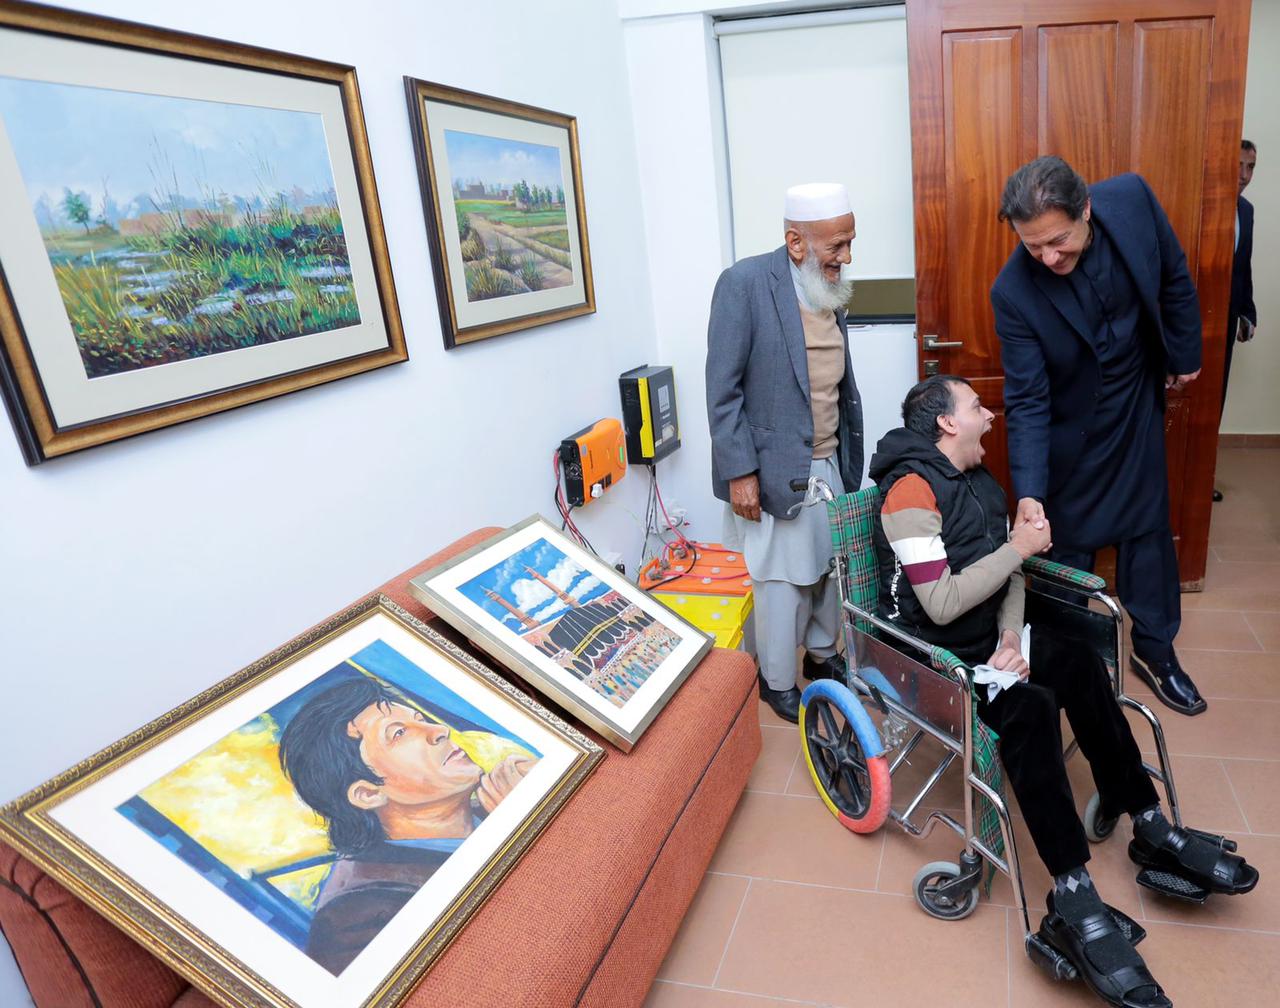 Disabled artist presents beautiful paintings to Imran Khan.